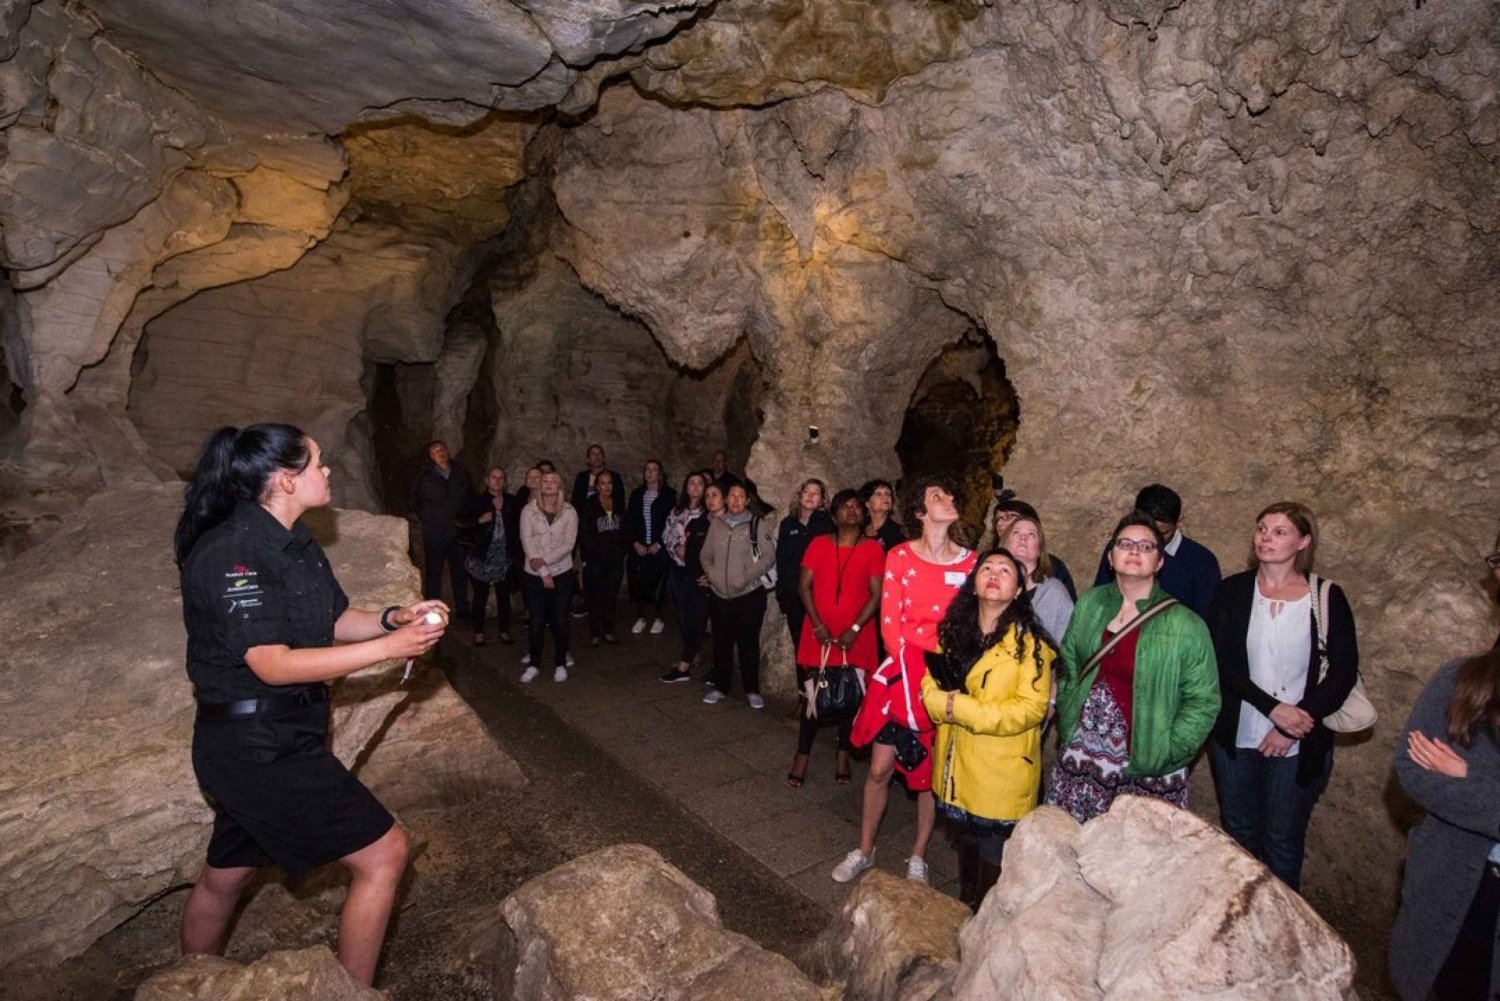 From Auckland: Transfer to Rotorua with Waitomo Caves Tour